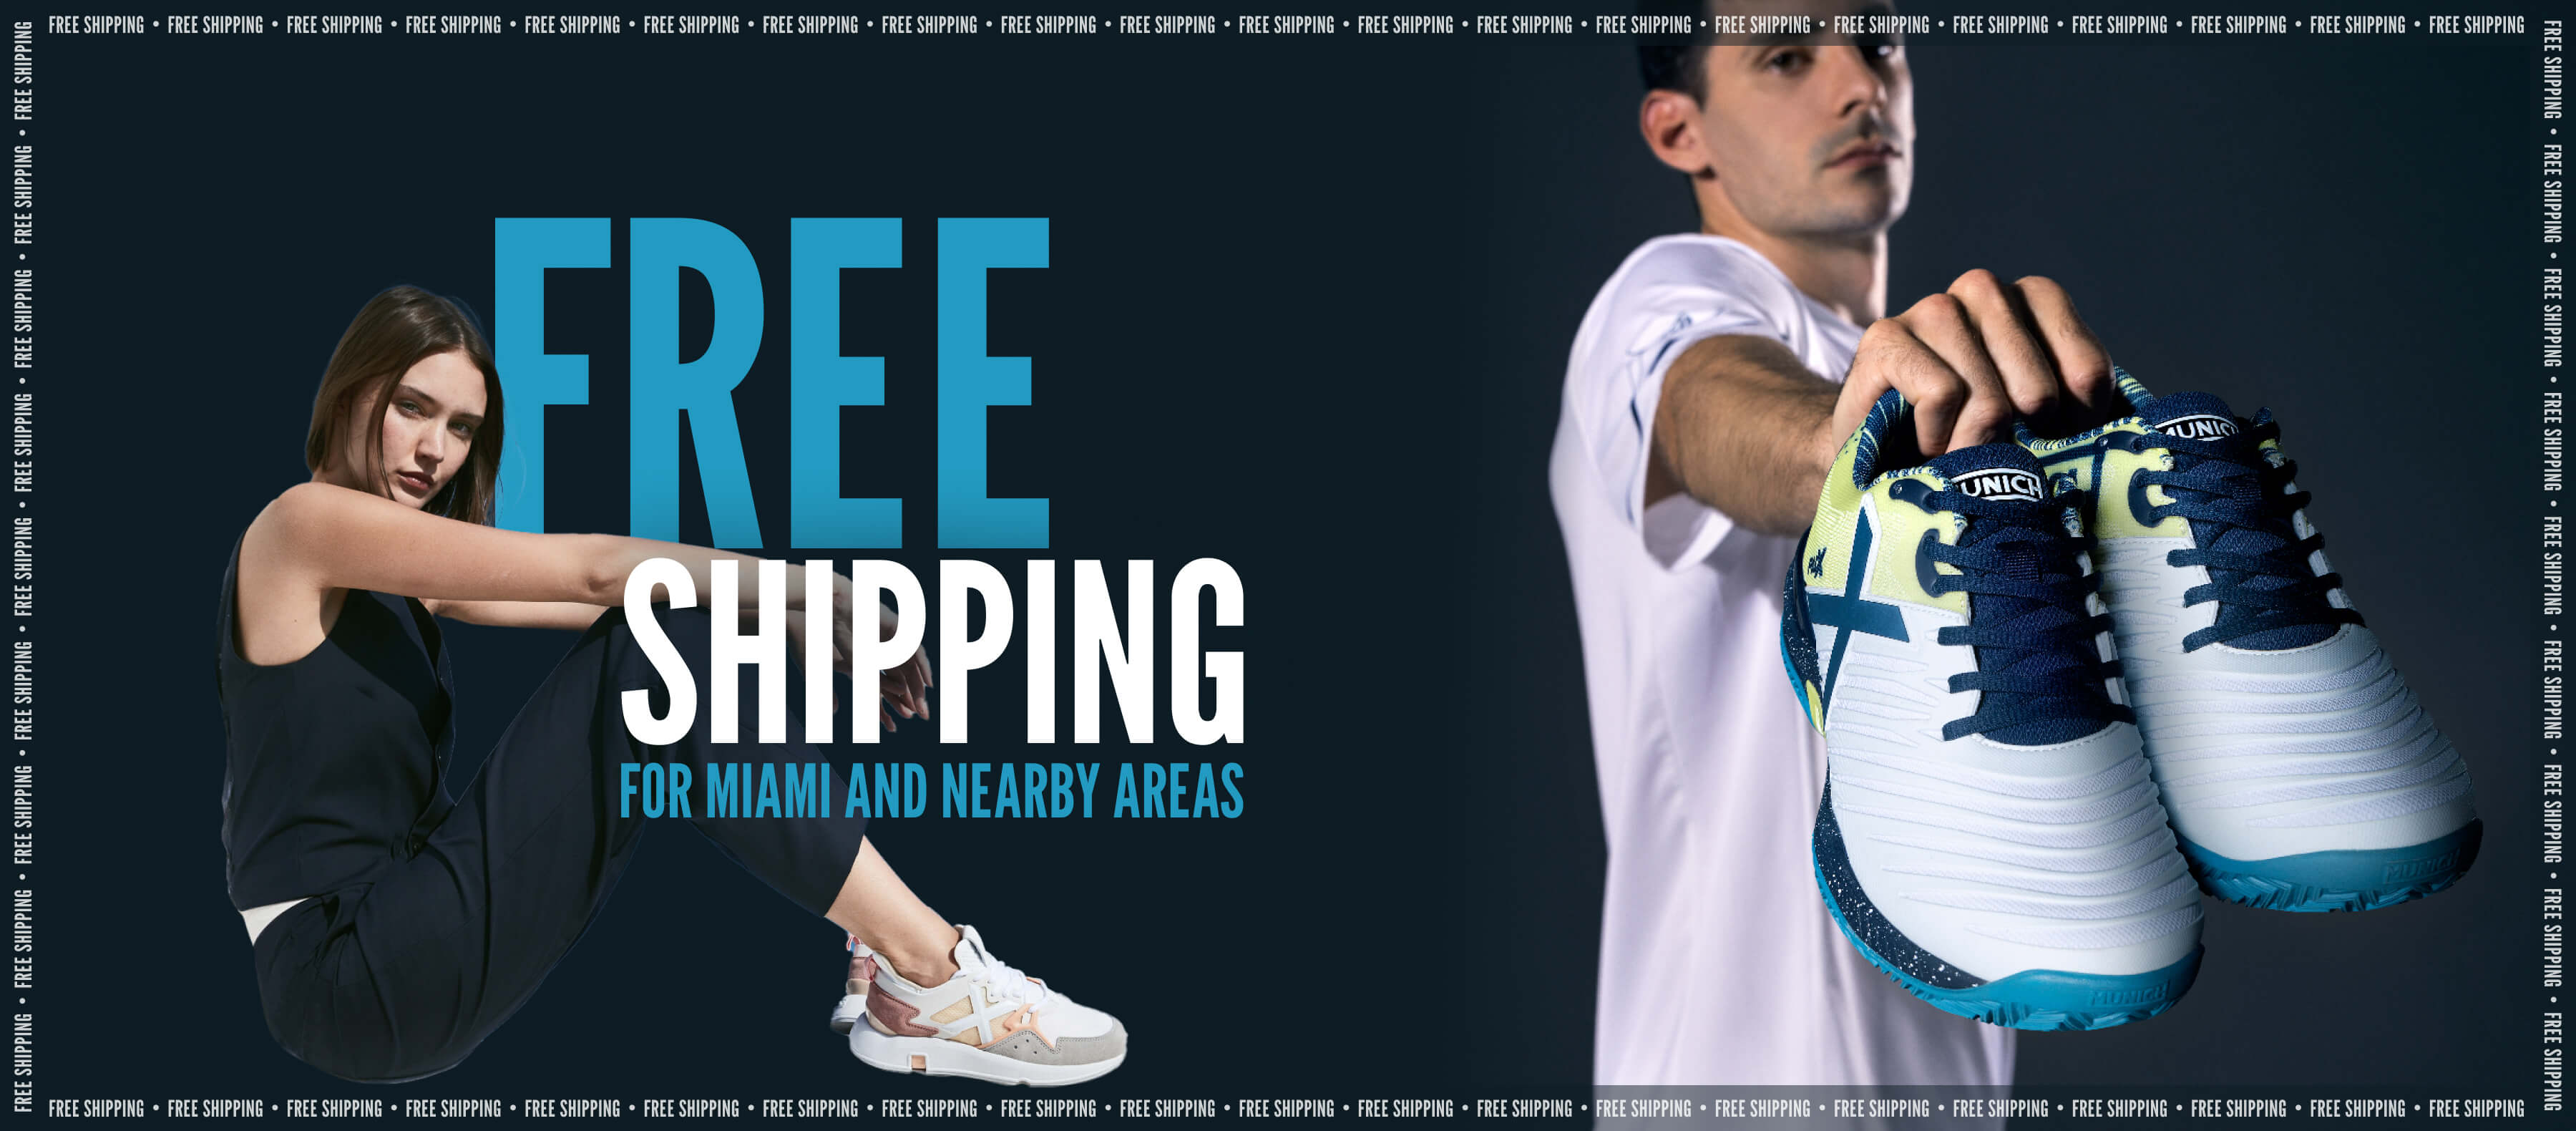 Free Shipping in Miami and nearby areas